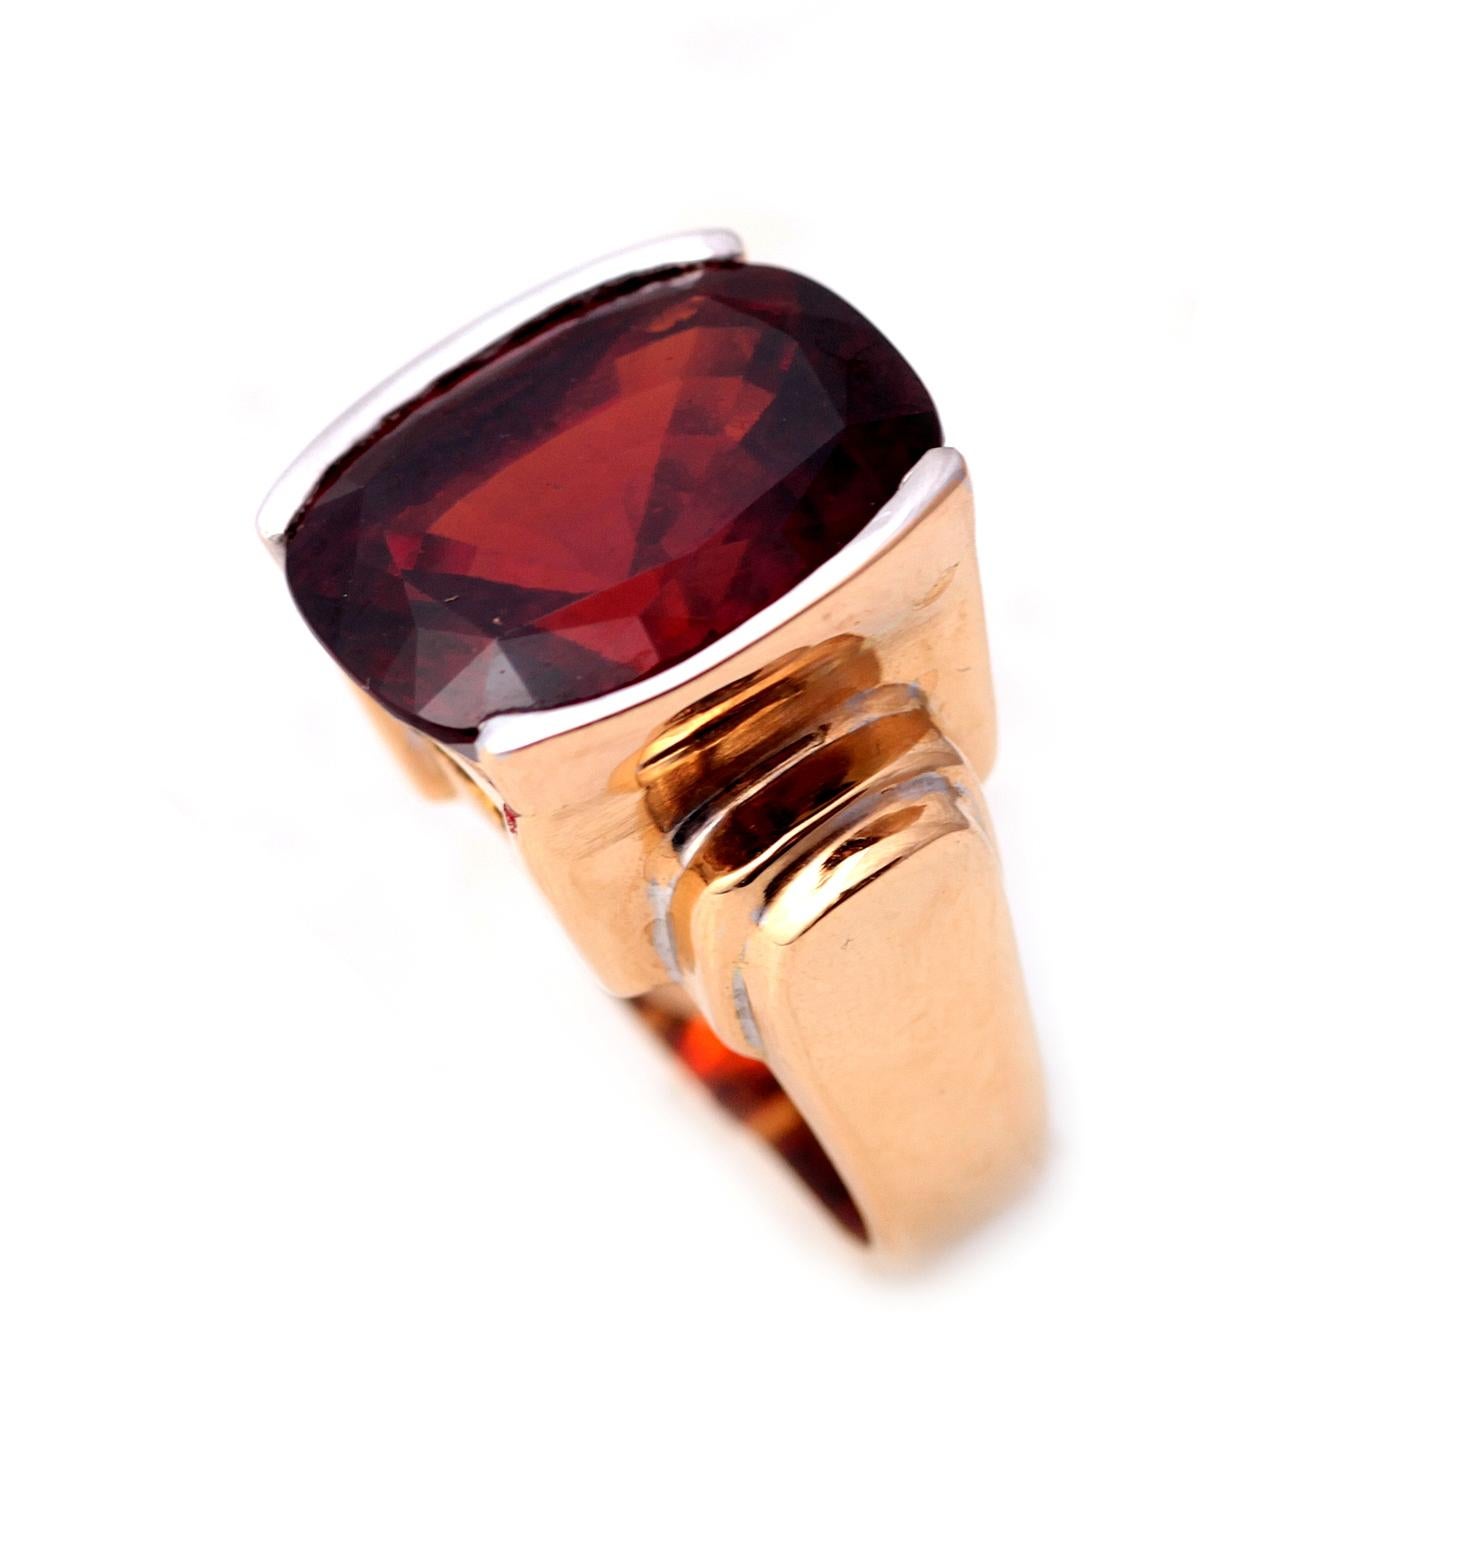 Important and spectacular cocktail ring presenting in the middle a beautiful barrel-shaped Hessonite Garnet.

18K yellow gold and white gold , 750 / 1000eme

Eagle's head Hallmark

Garnet weight: 21.68 carats

Very nice shine!

Ring Dimensions: 18 ×